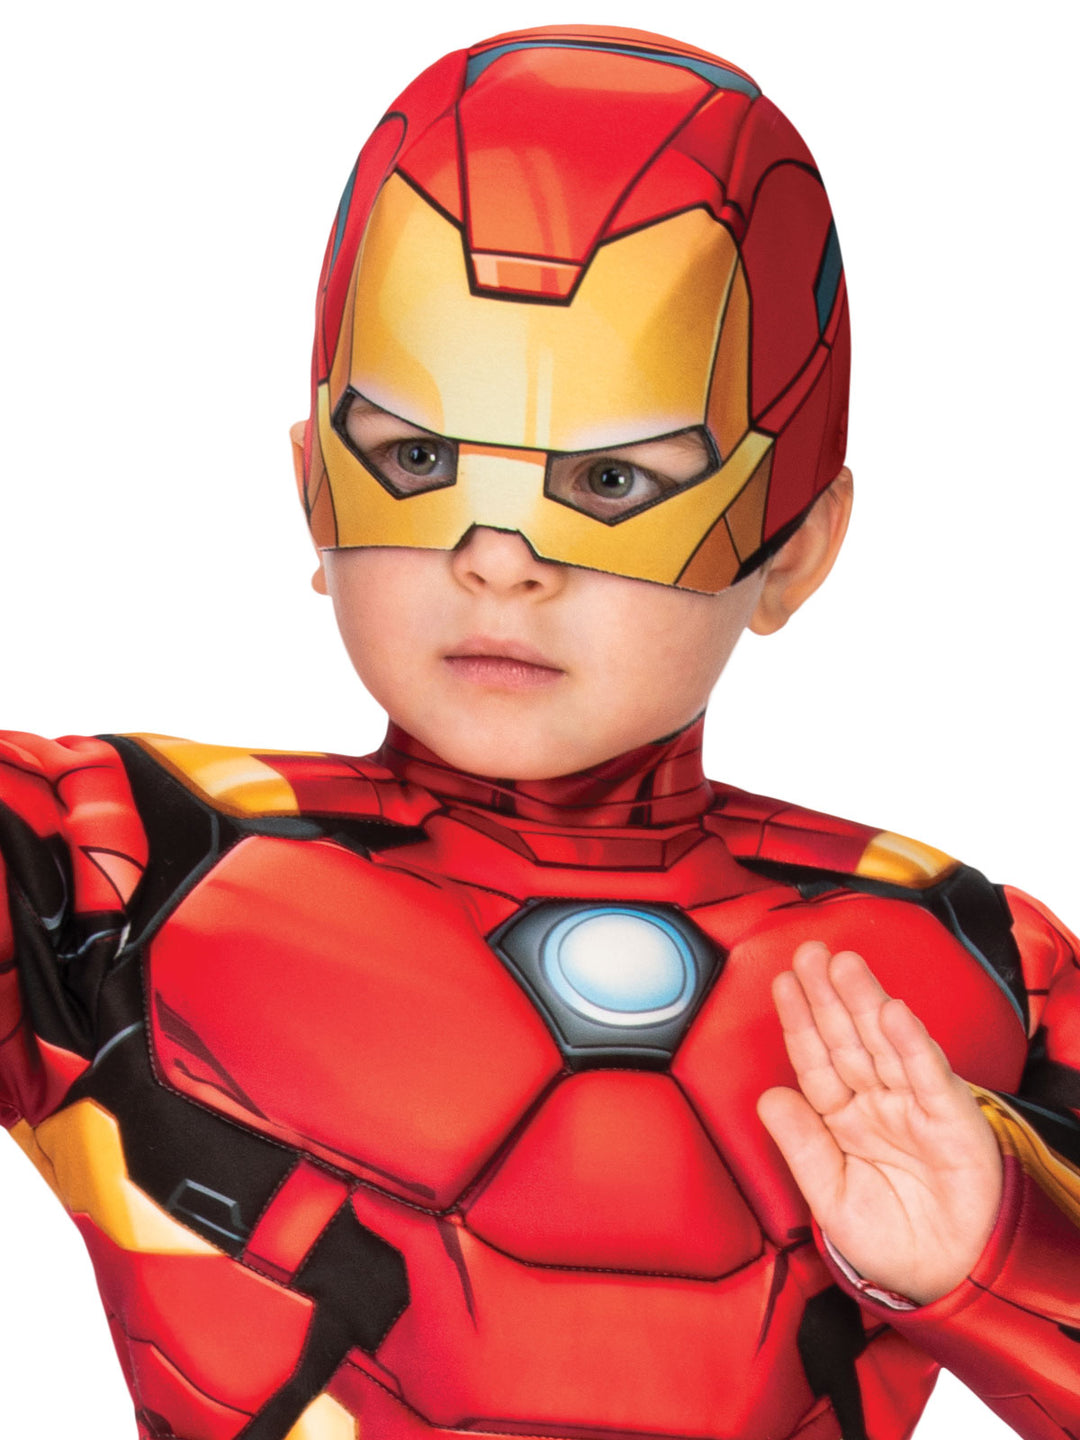 IRON-MAN DELUXE COSTUME, TODDLER - Little Shop of Horrors